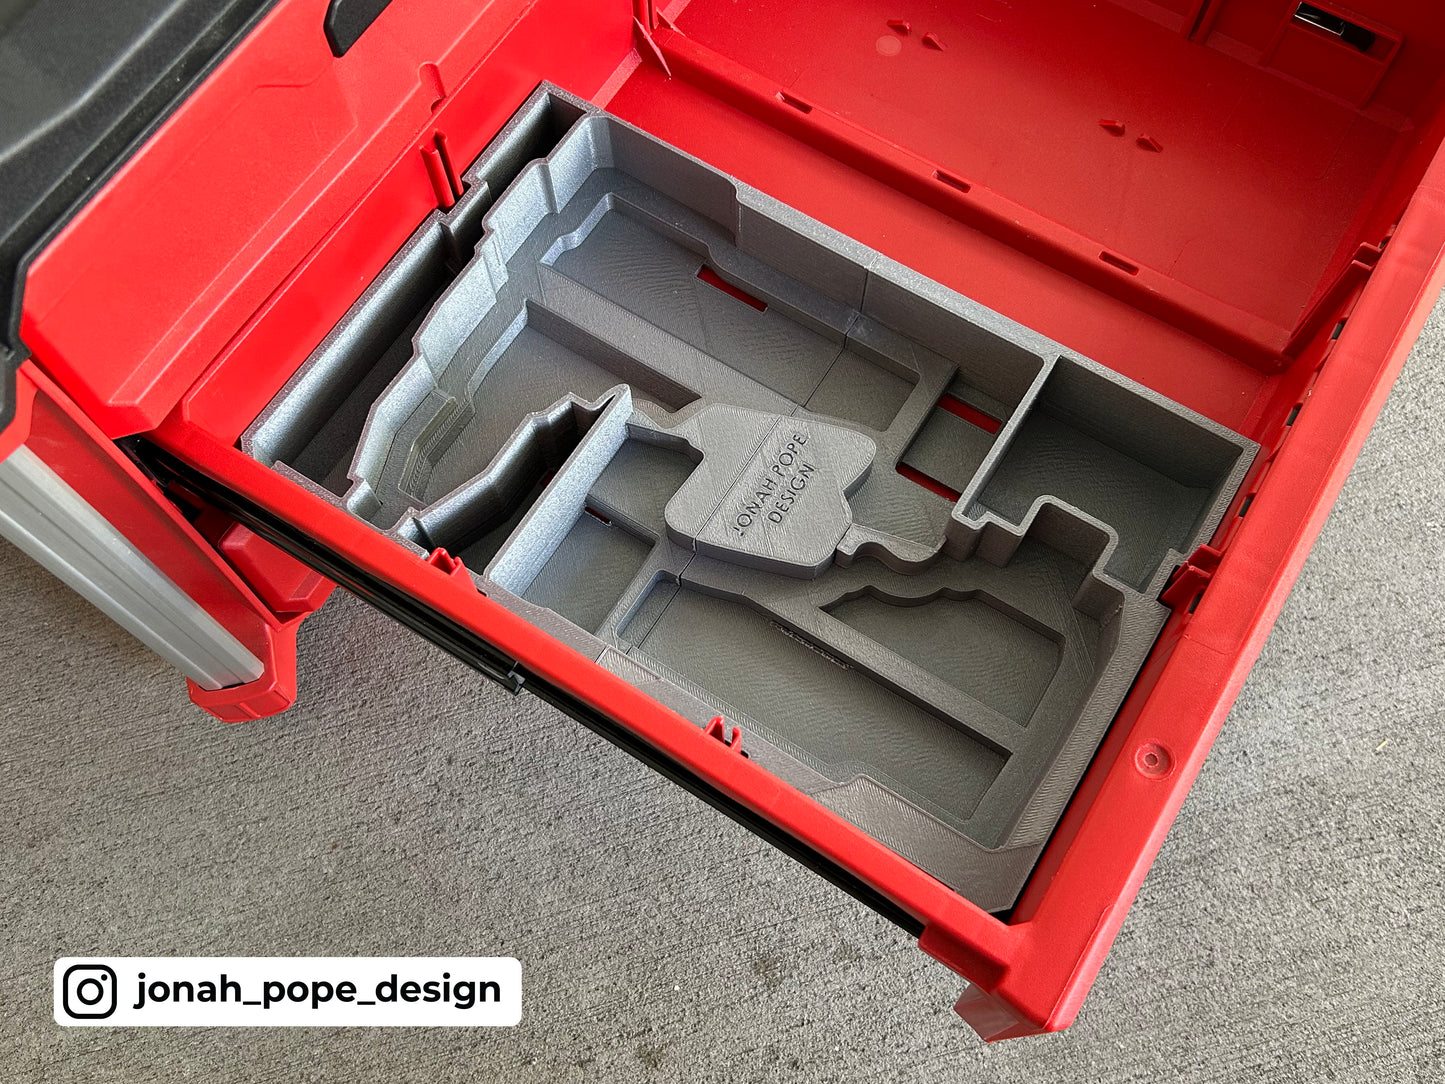 Packout Drawer Insert For M18 Gen 4 Drill and Impact Driver -Jonah Pope Design (JPD-18DID)